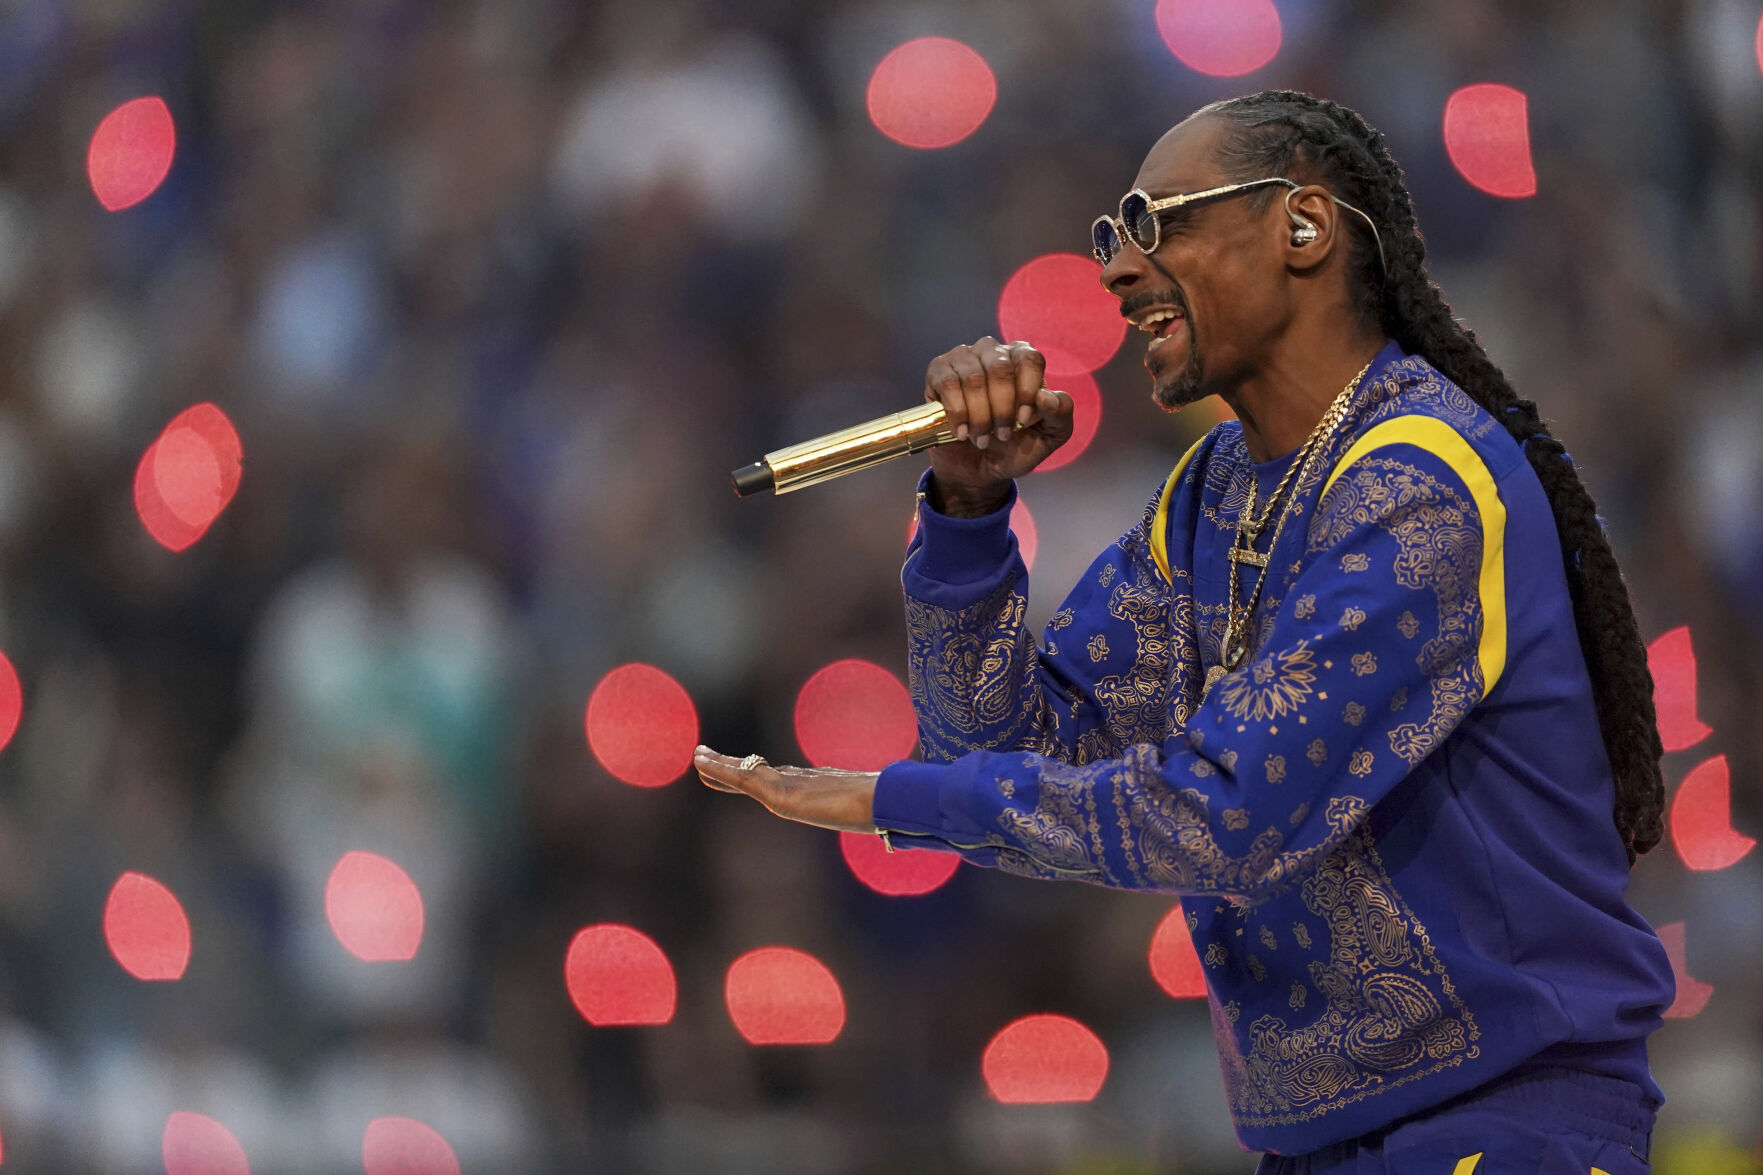 Murder charges and halftime extravaganzas: Snoop Dogg's long road